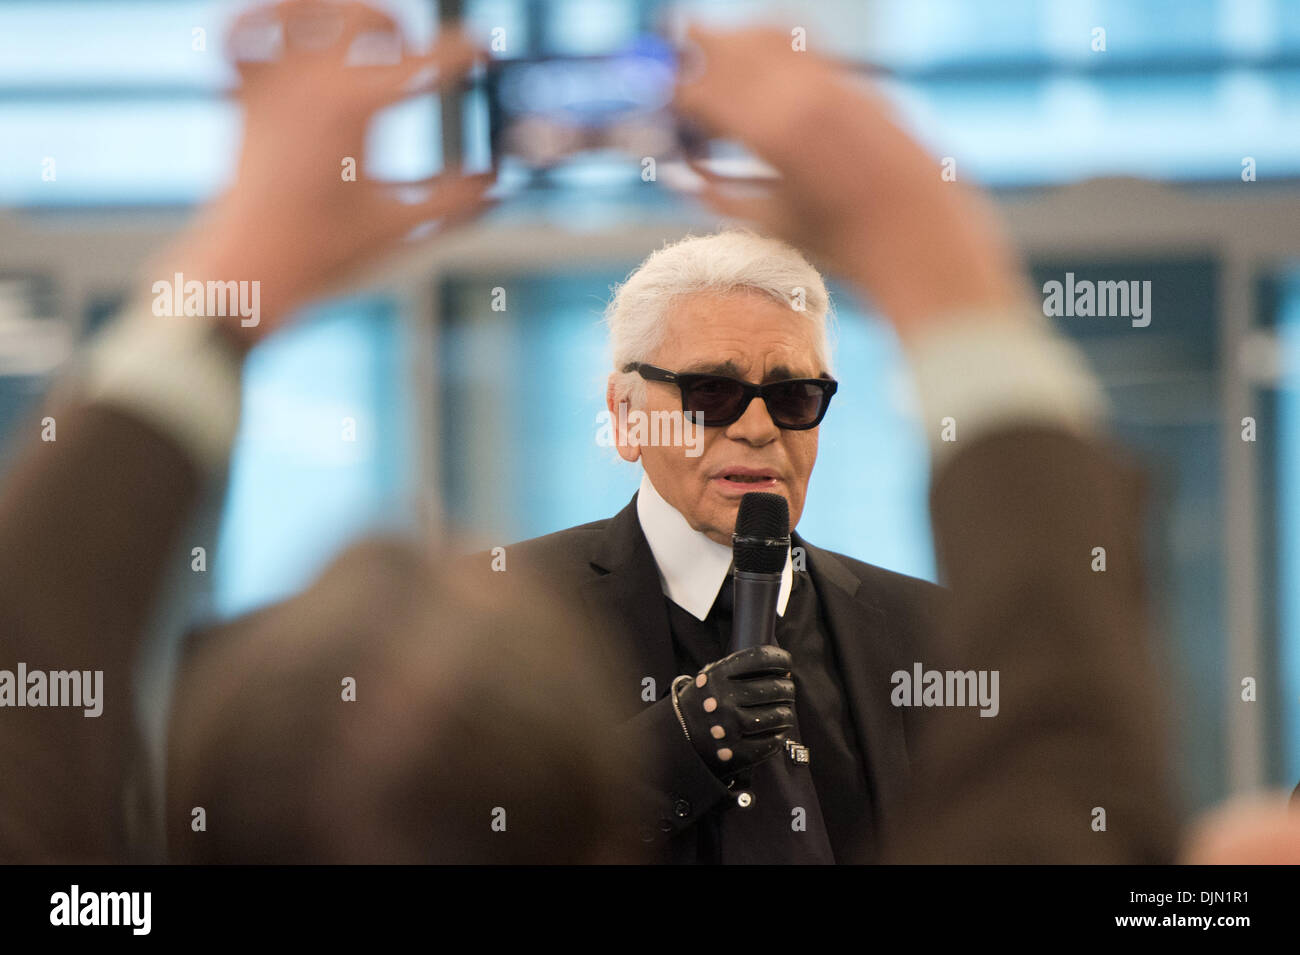 Berlin, Germany. 29th Nov, 2013. Fashion designer Karl Lagerfeld acts as editor-in-chief for the 01 December 2013 edition of Welt am Sonntag and takes part in a editors' conference in Berlin, Germany, 29 November 2013. Photo: MAURIZIO GAMBARINI/dpa/Alamy Live News Stock Photo